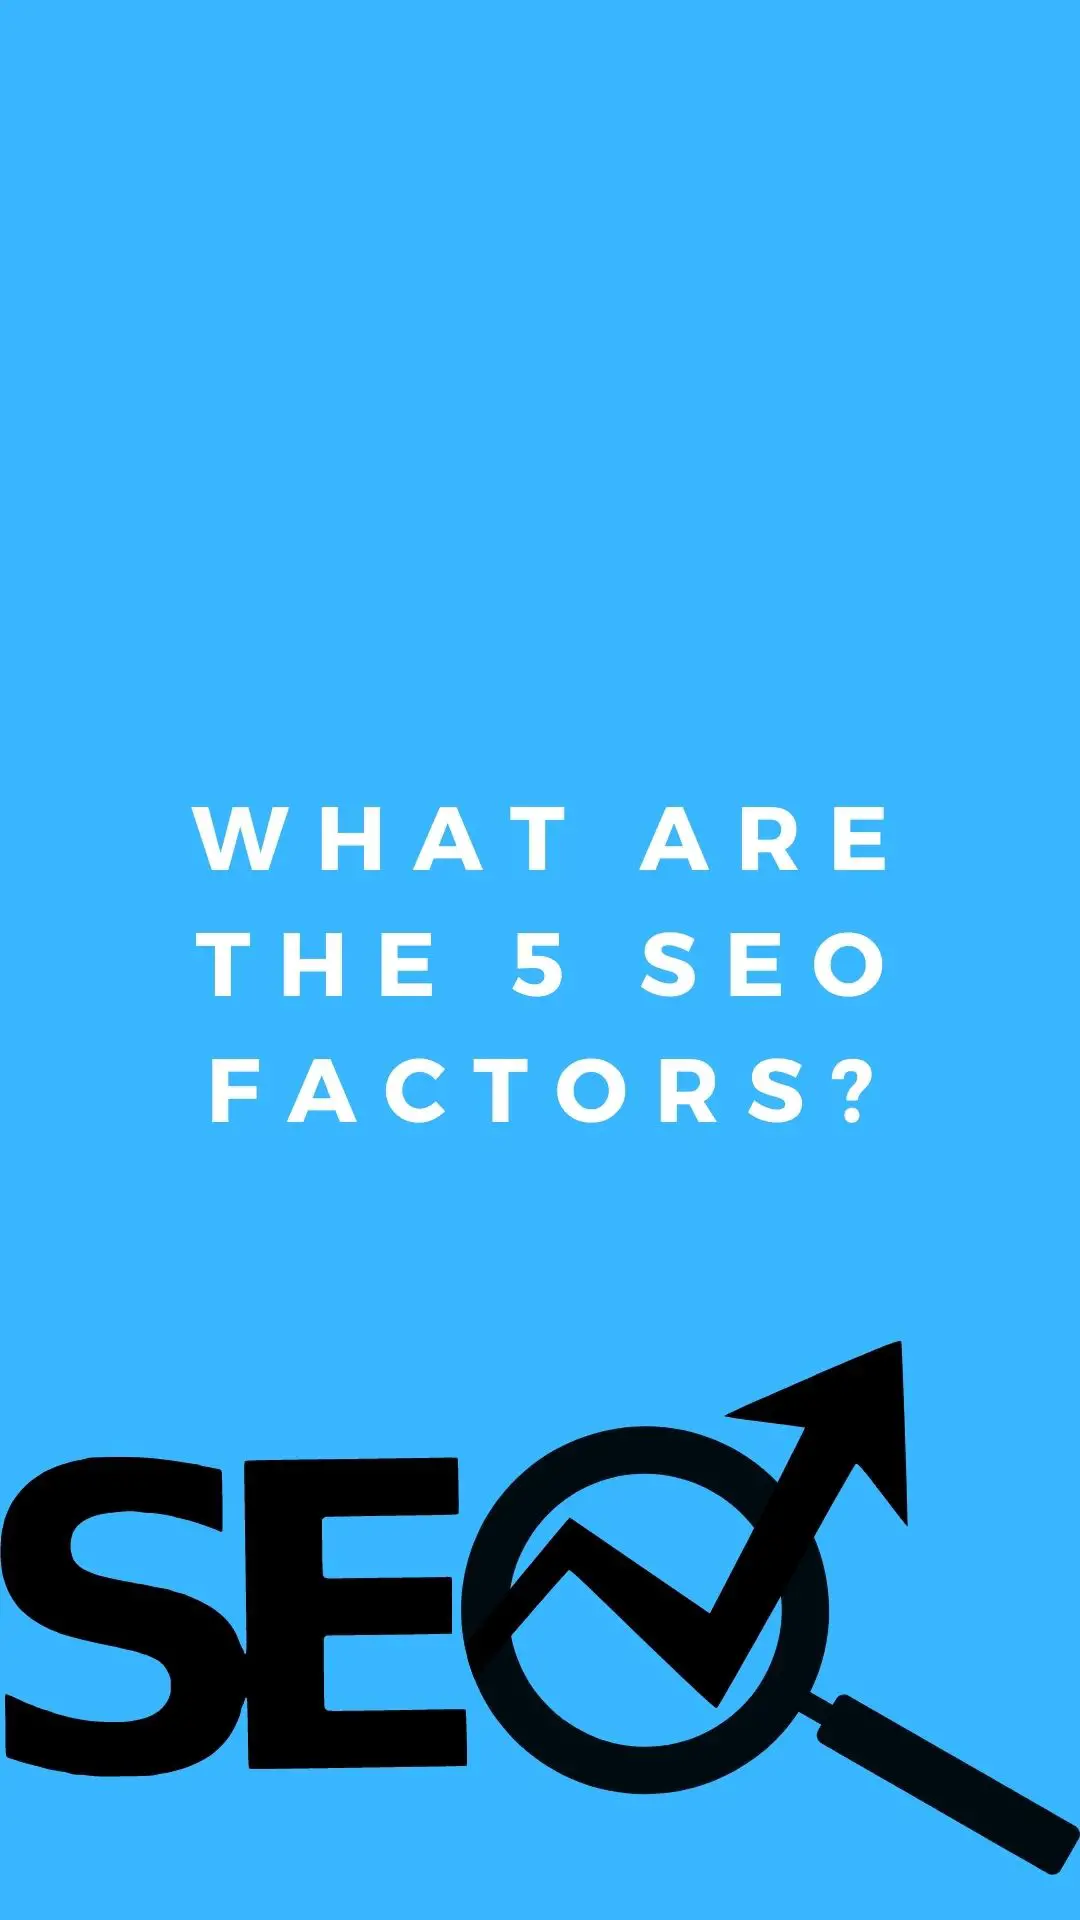 What are the 5 SEO factors? : Keywords research, Url optimization, meta tags, header tags, content optimizatio